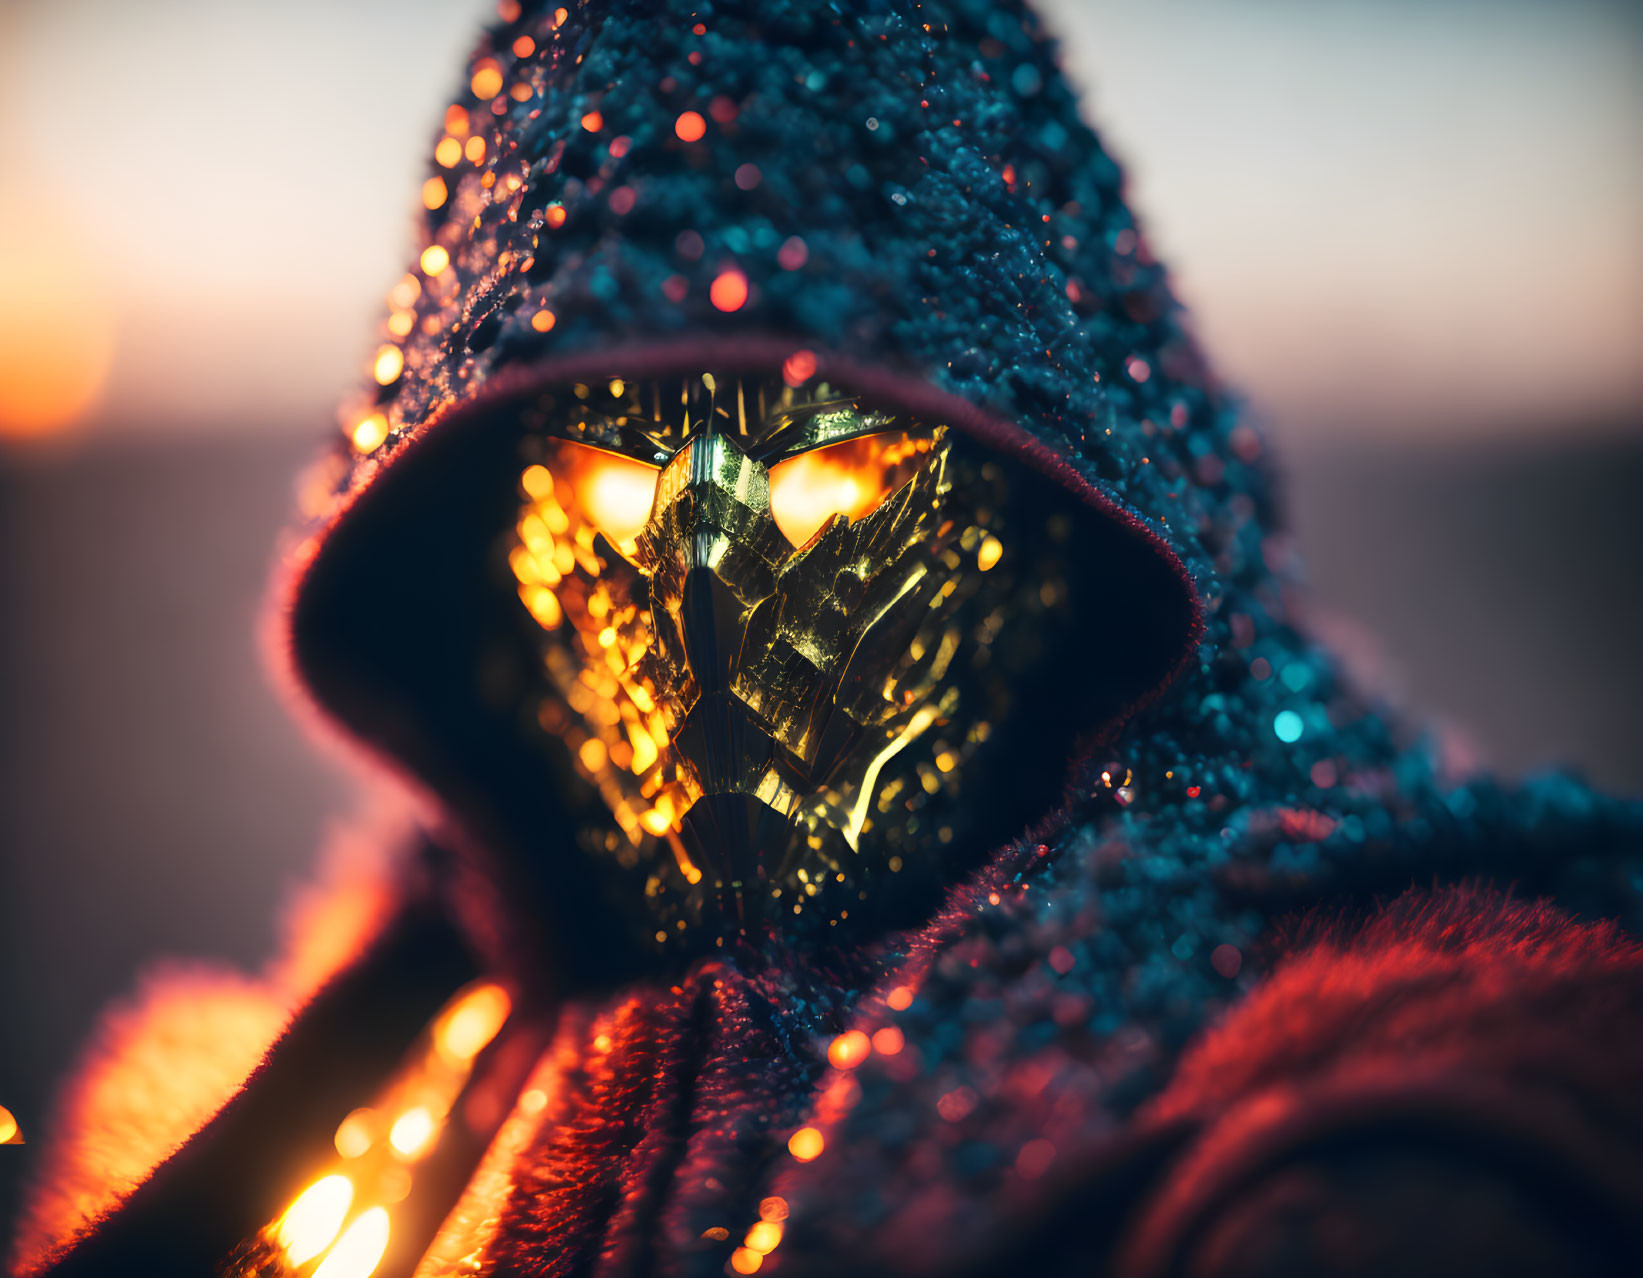 Hooded figure with golden mechanical mask in dew-speckled cloak